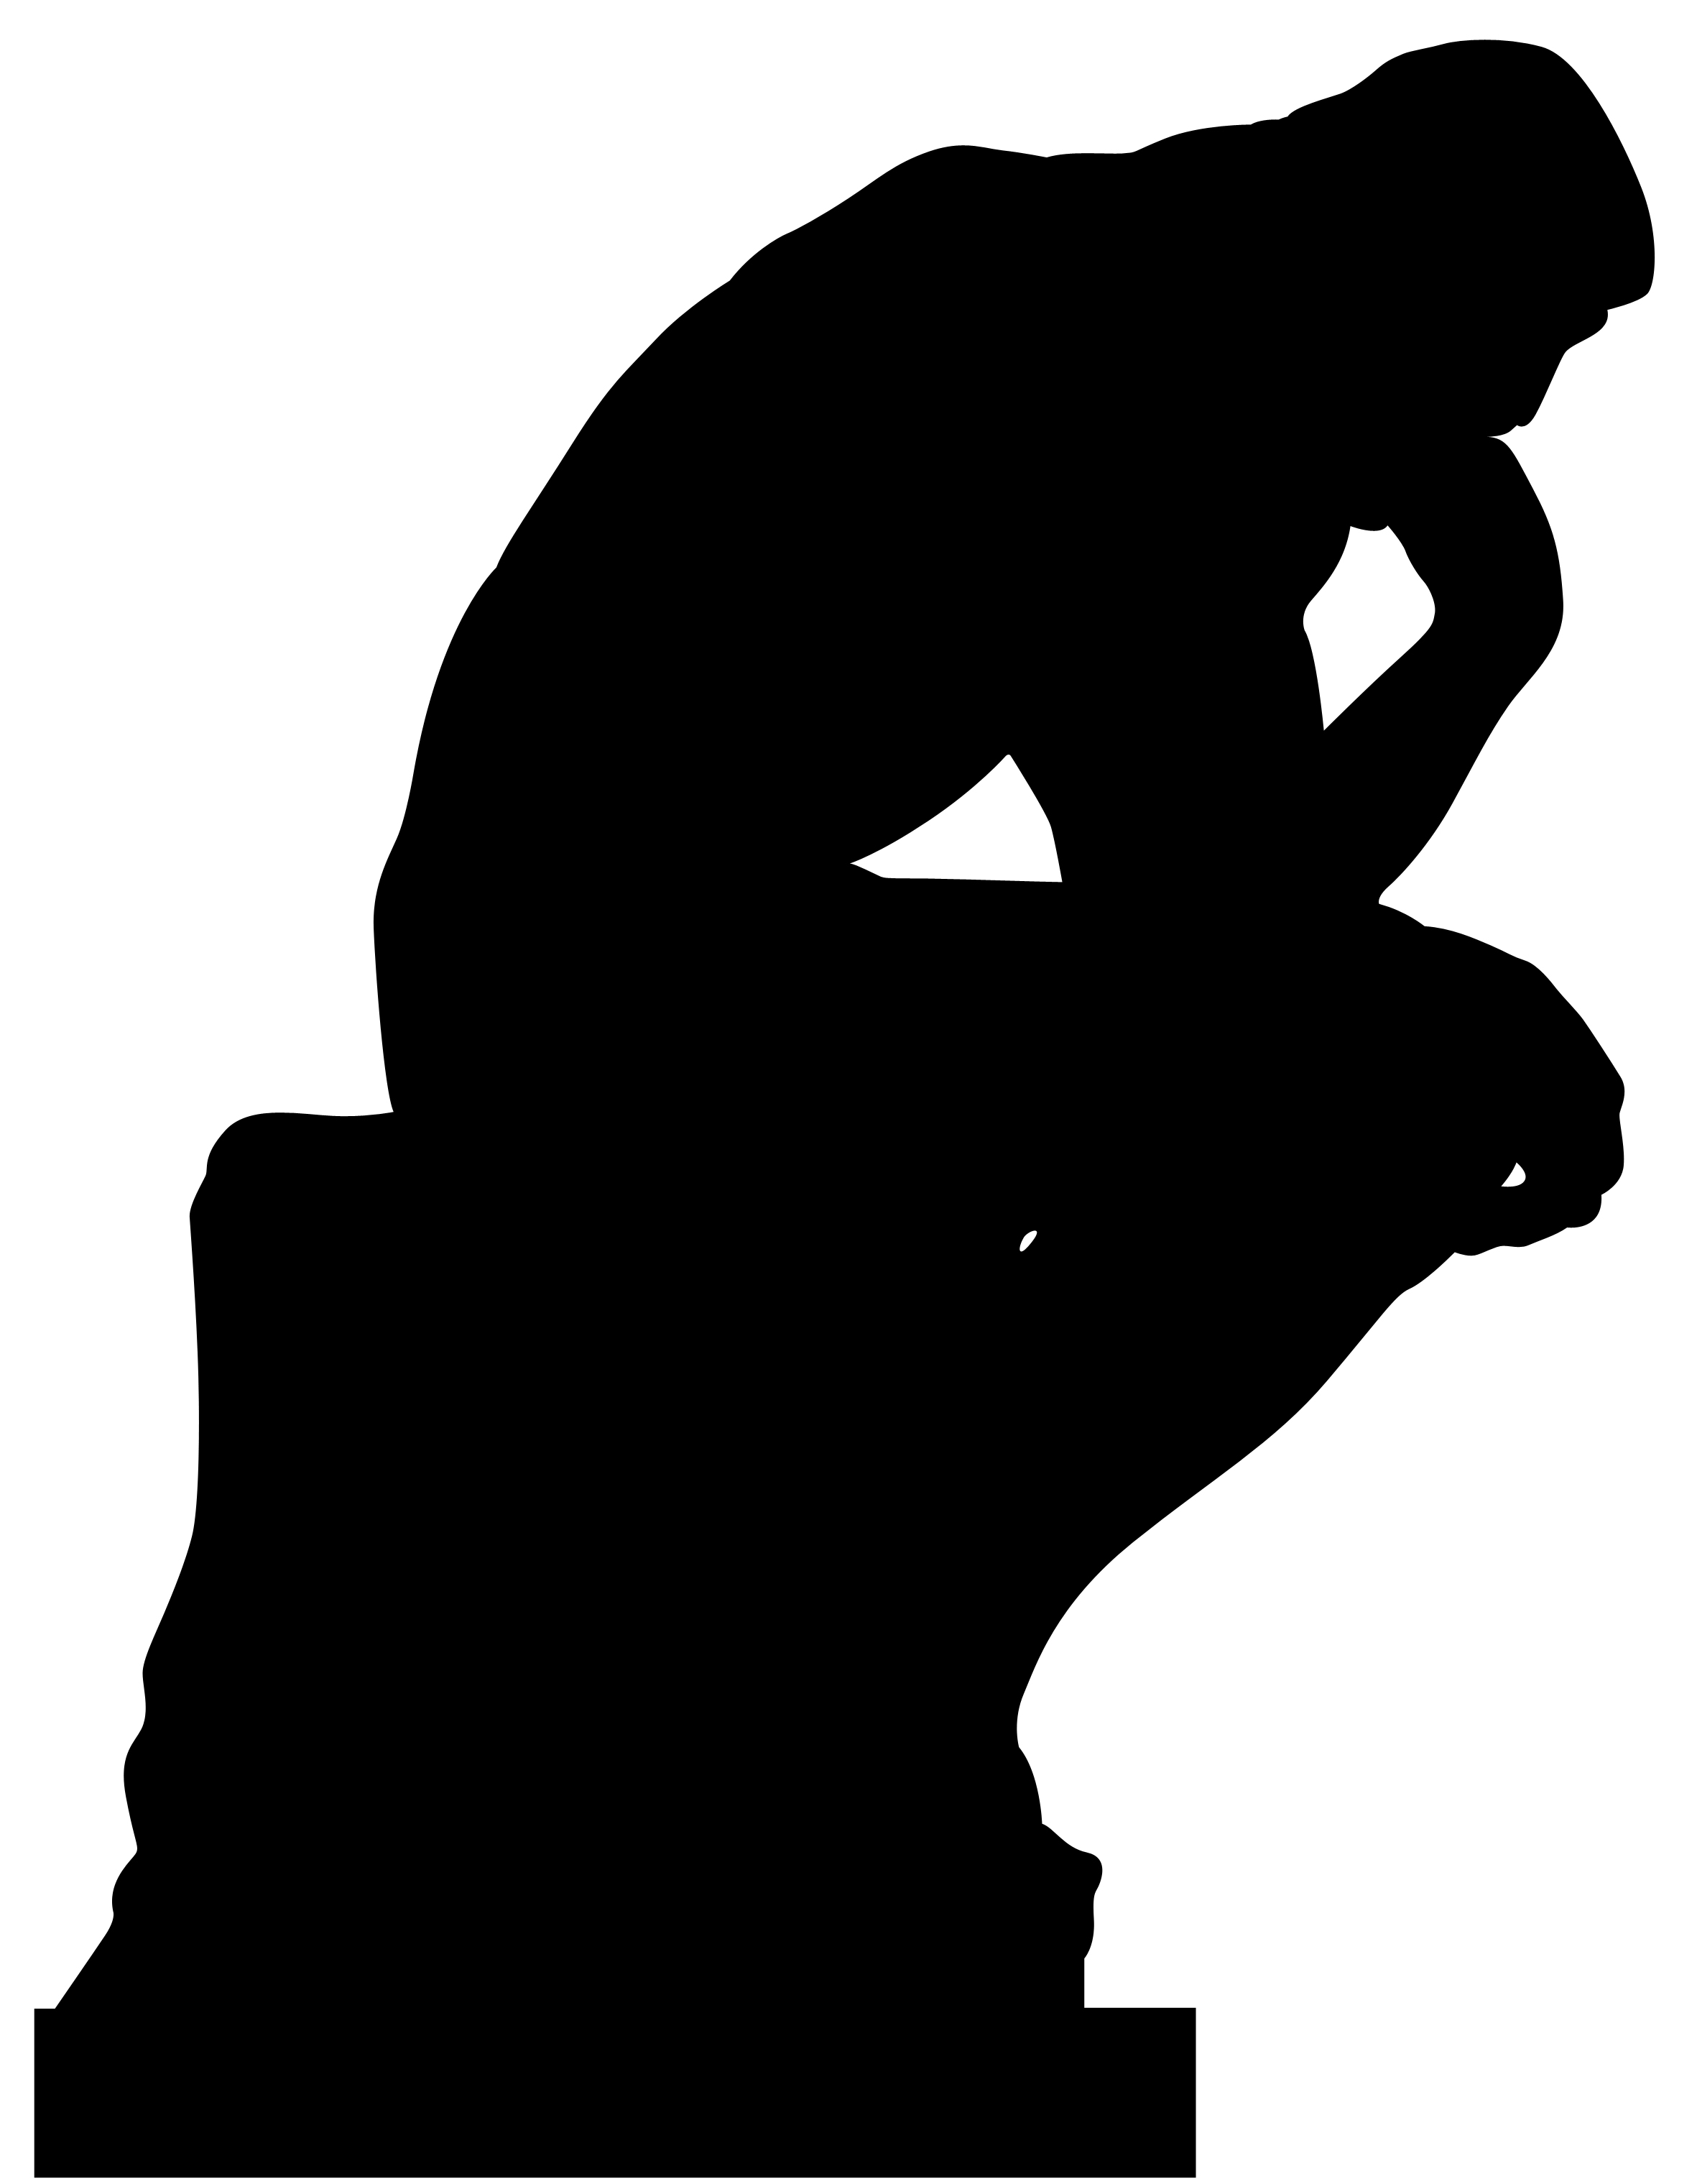 Man Thinking Silhouette   Clipart Panda   Free Clipart Images